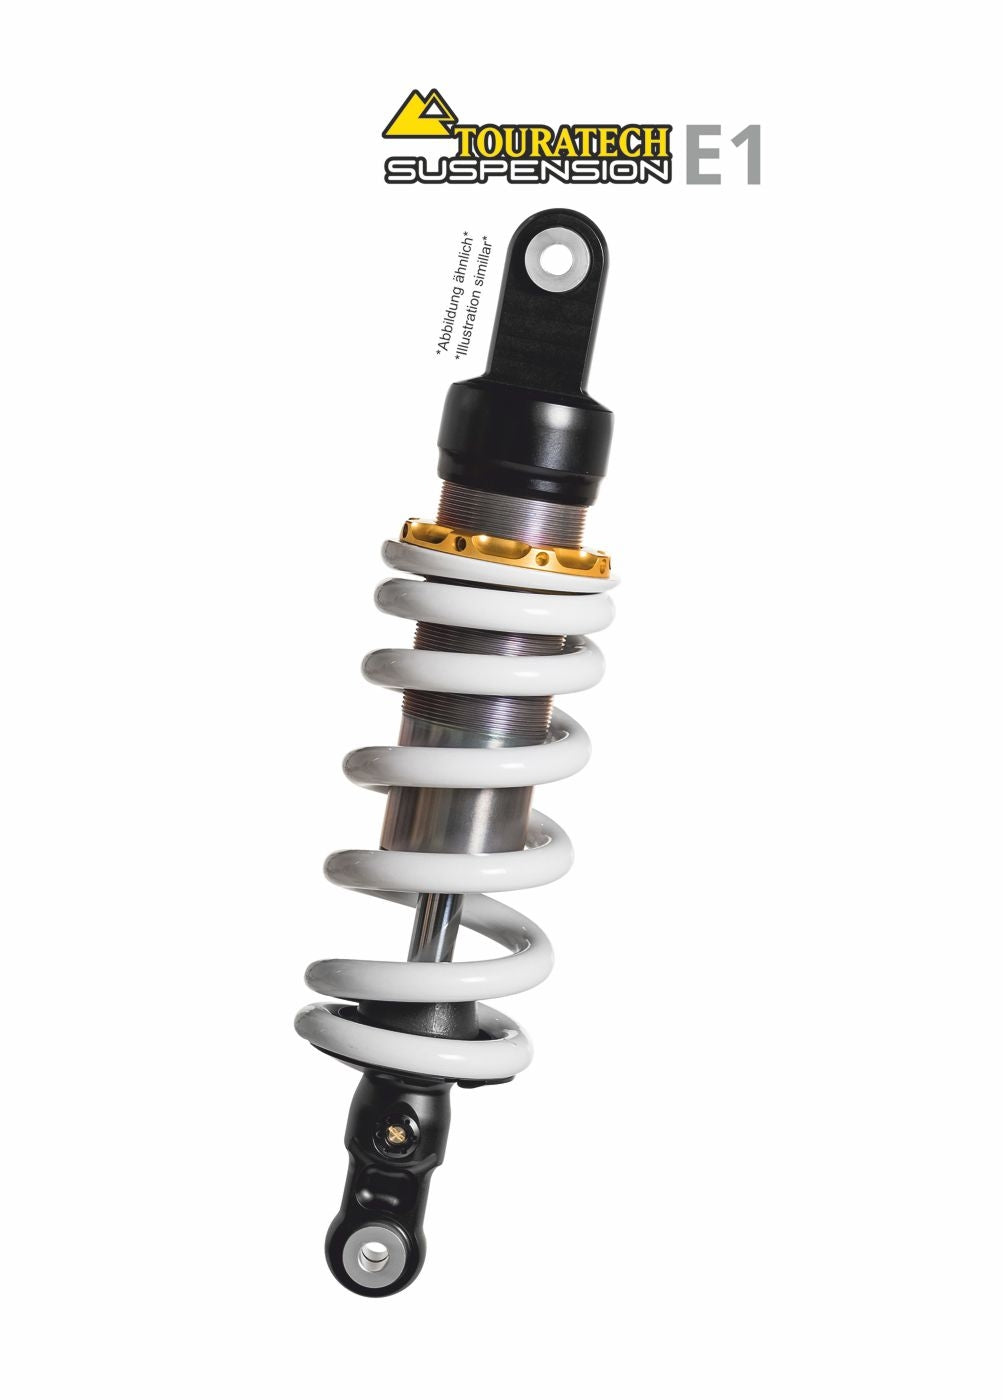 Touratech Suspension E1 shock absorber for Ducati 900 SS 1991 - 1995